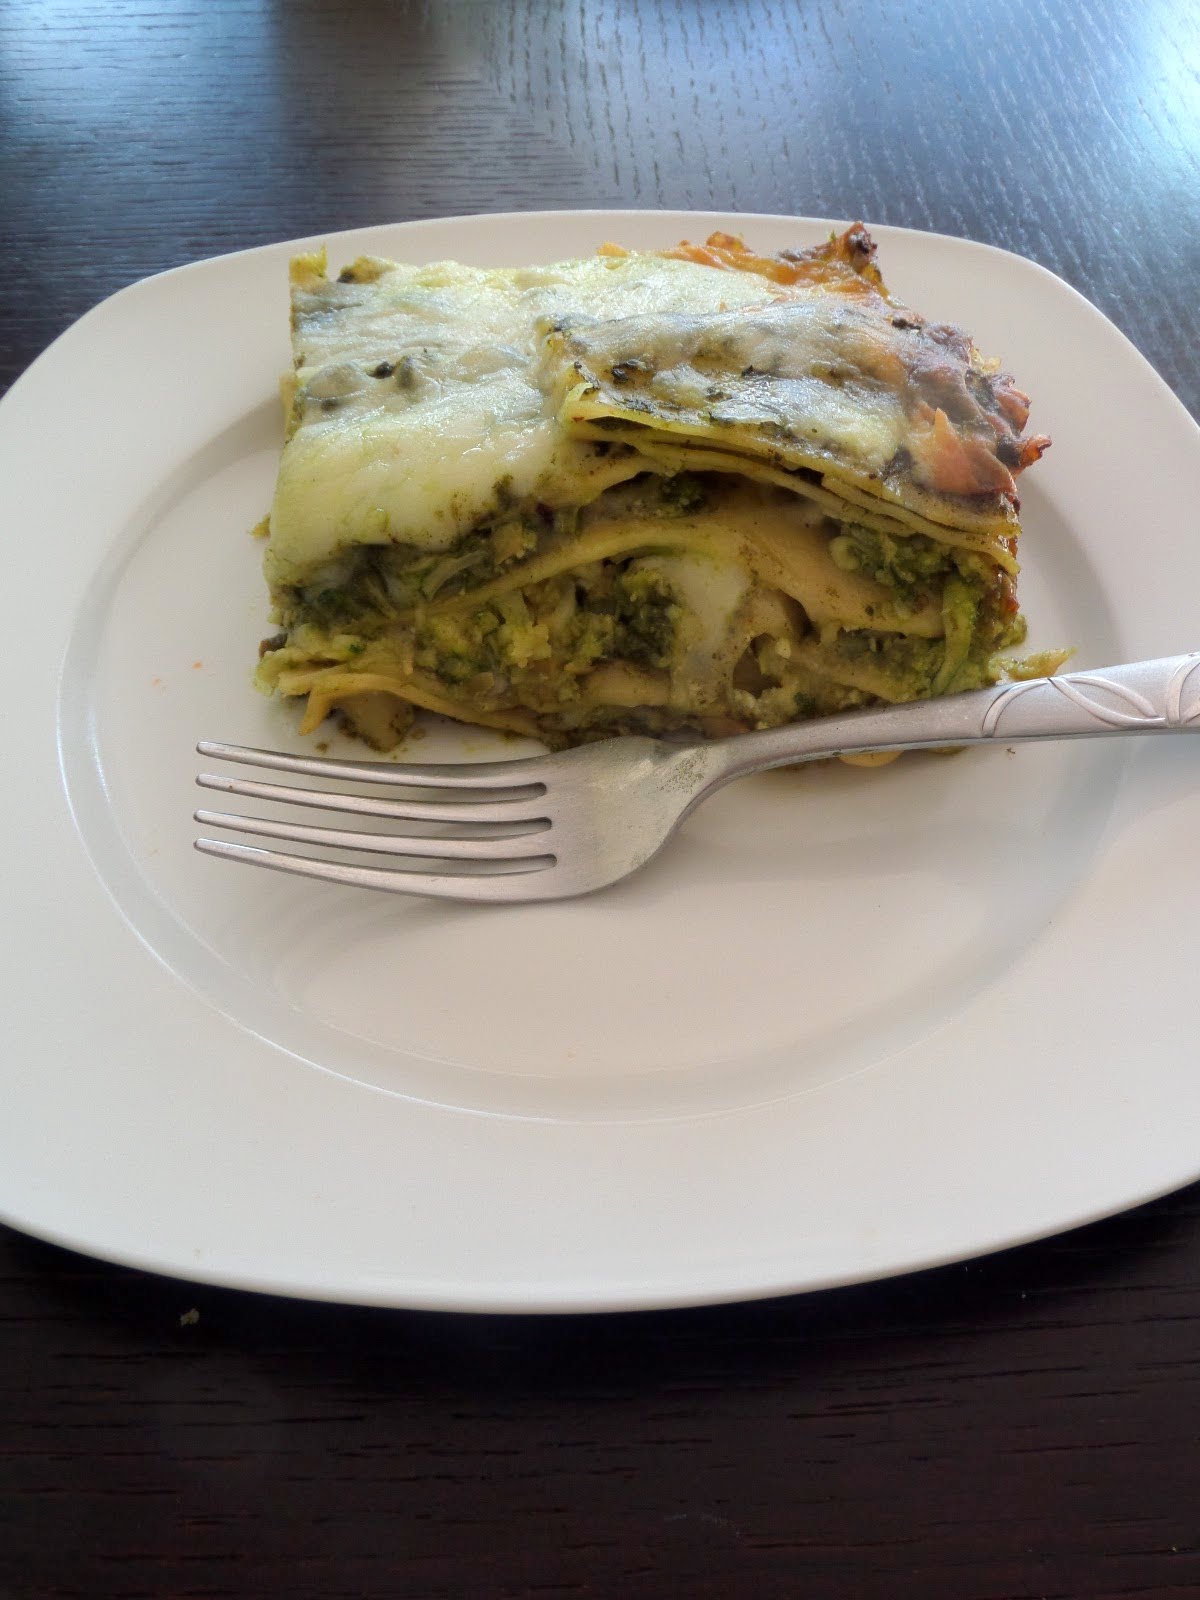 Green Lasagna:  A meatless lasagna layered with green vegetables, cheese, chickpeas, and pesto.